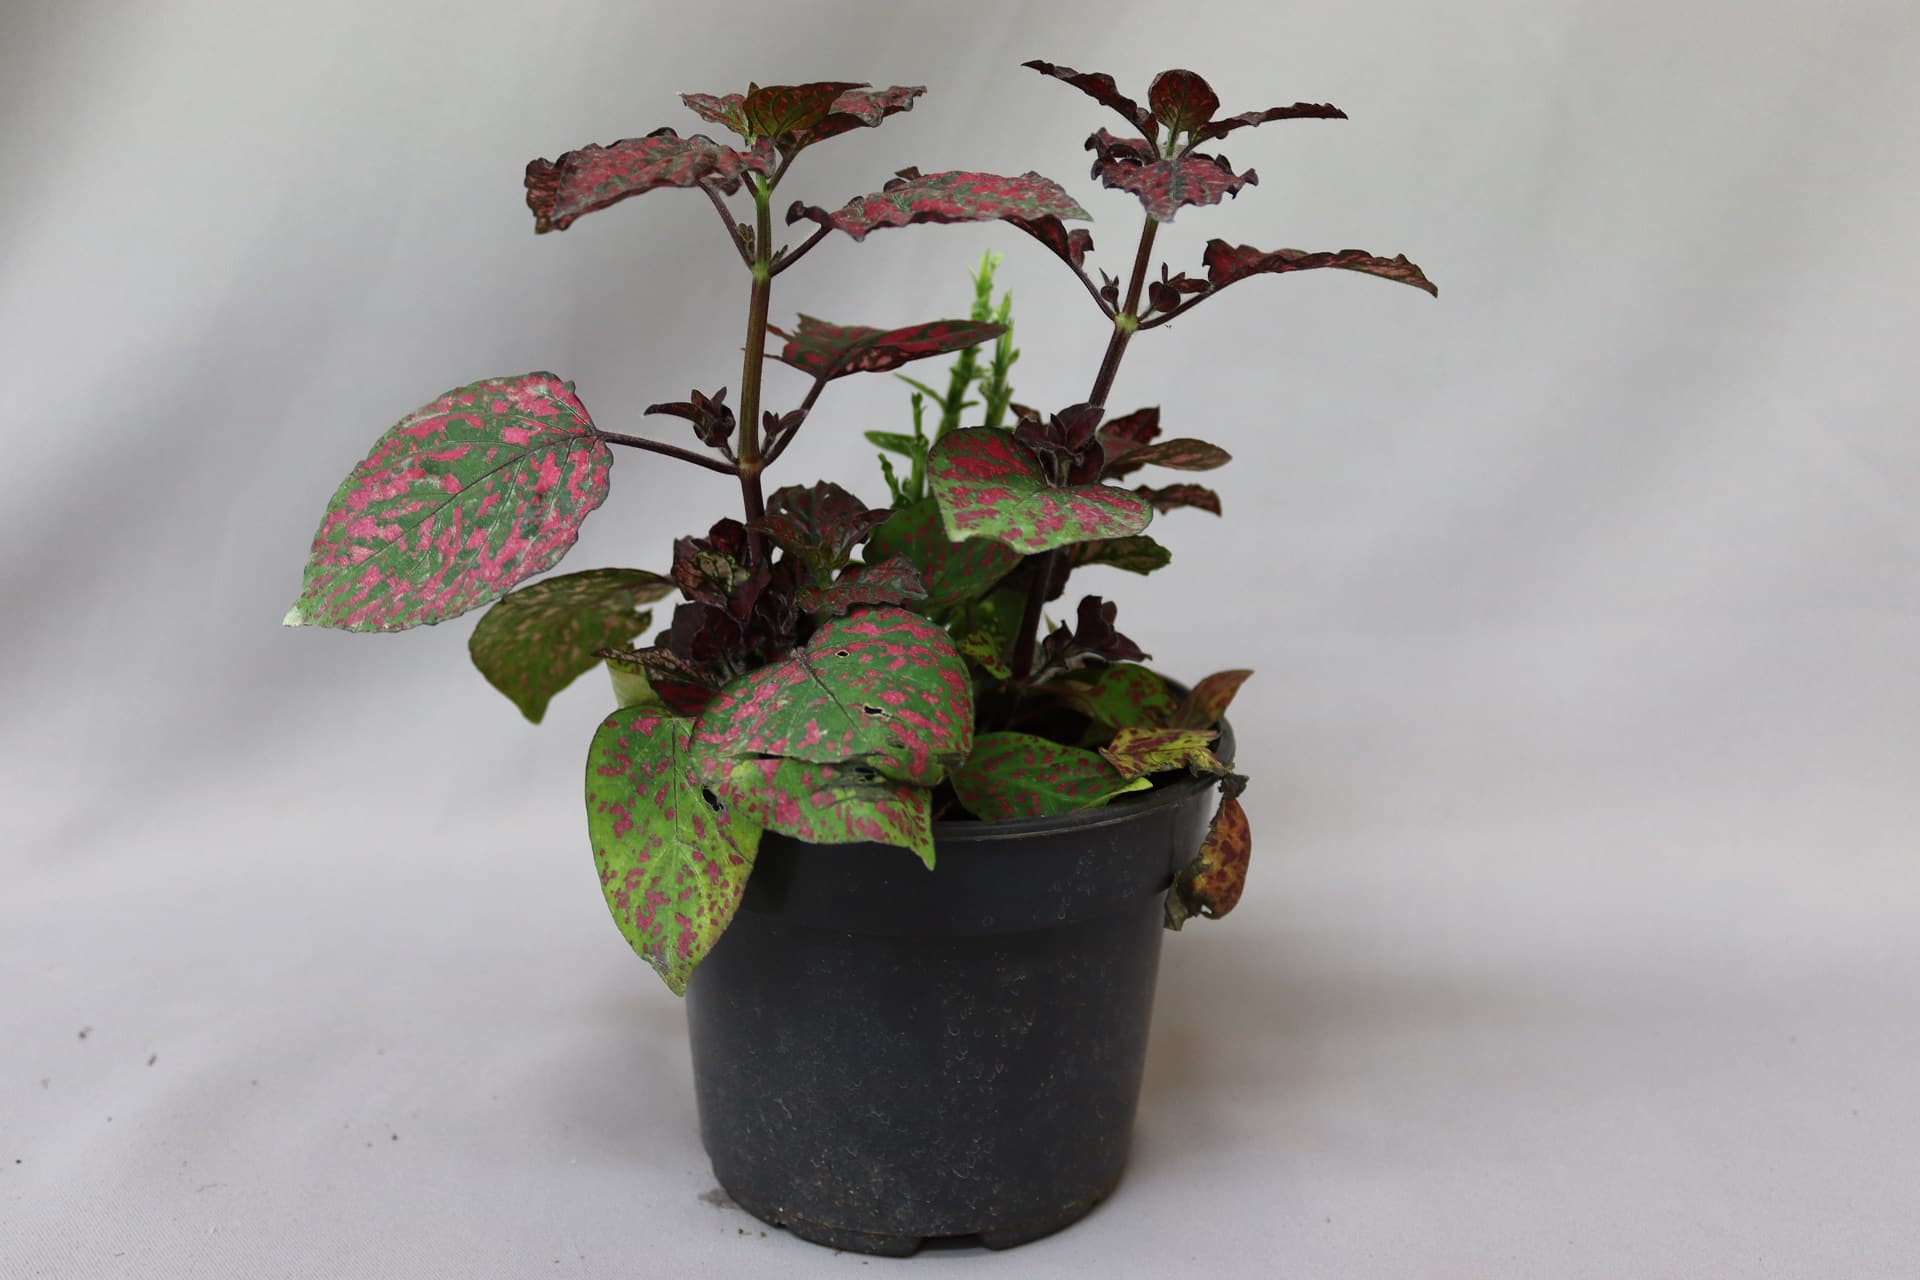 Hypoestes plant with red and green leaves in a black plastic pot.